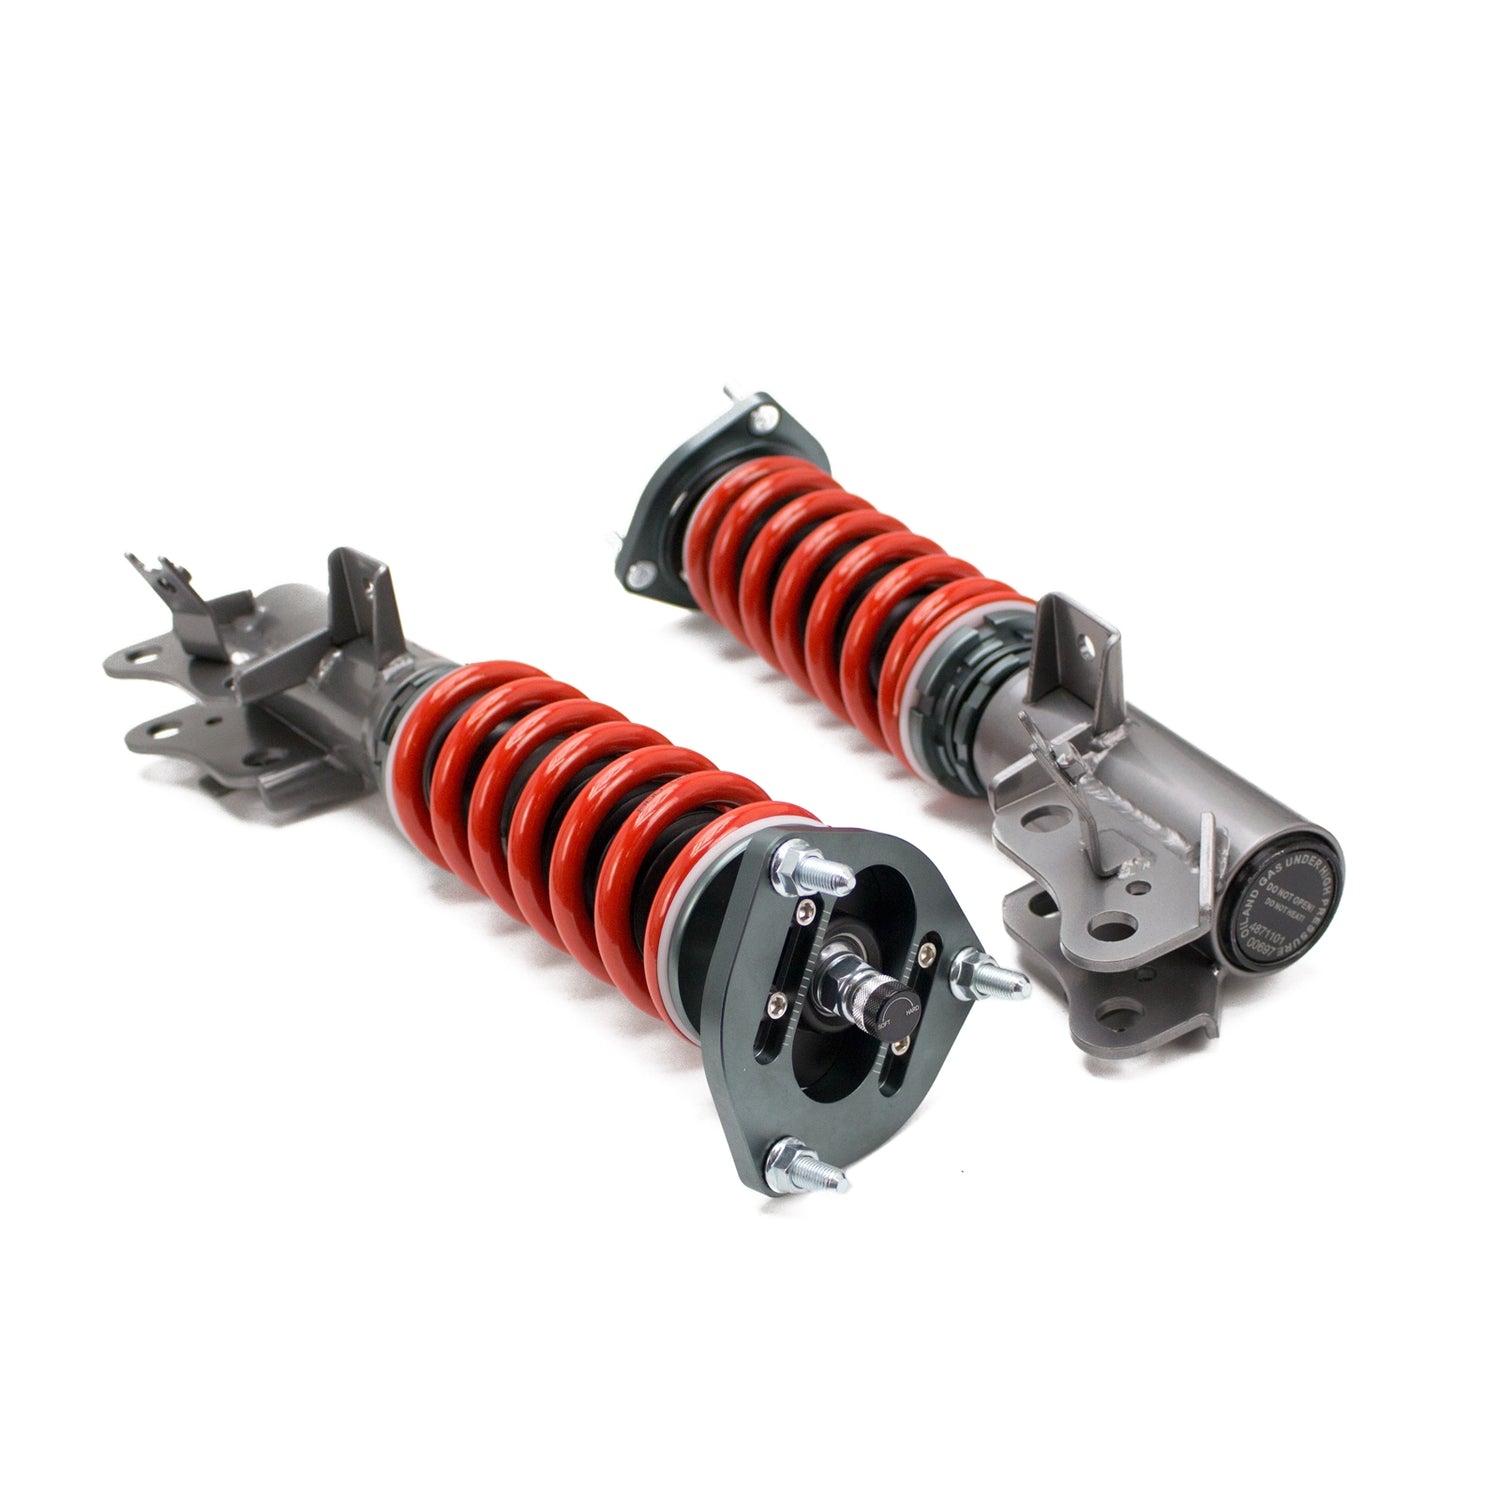 Godspeed MRS1560-A MonoRS Coilover Lowering Kit, 32 Damping Adjustment, Ride Height Adjustable